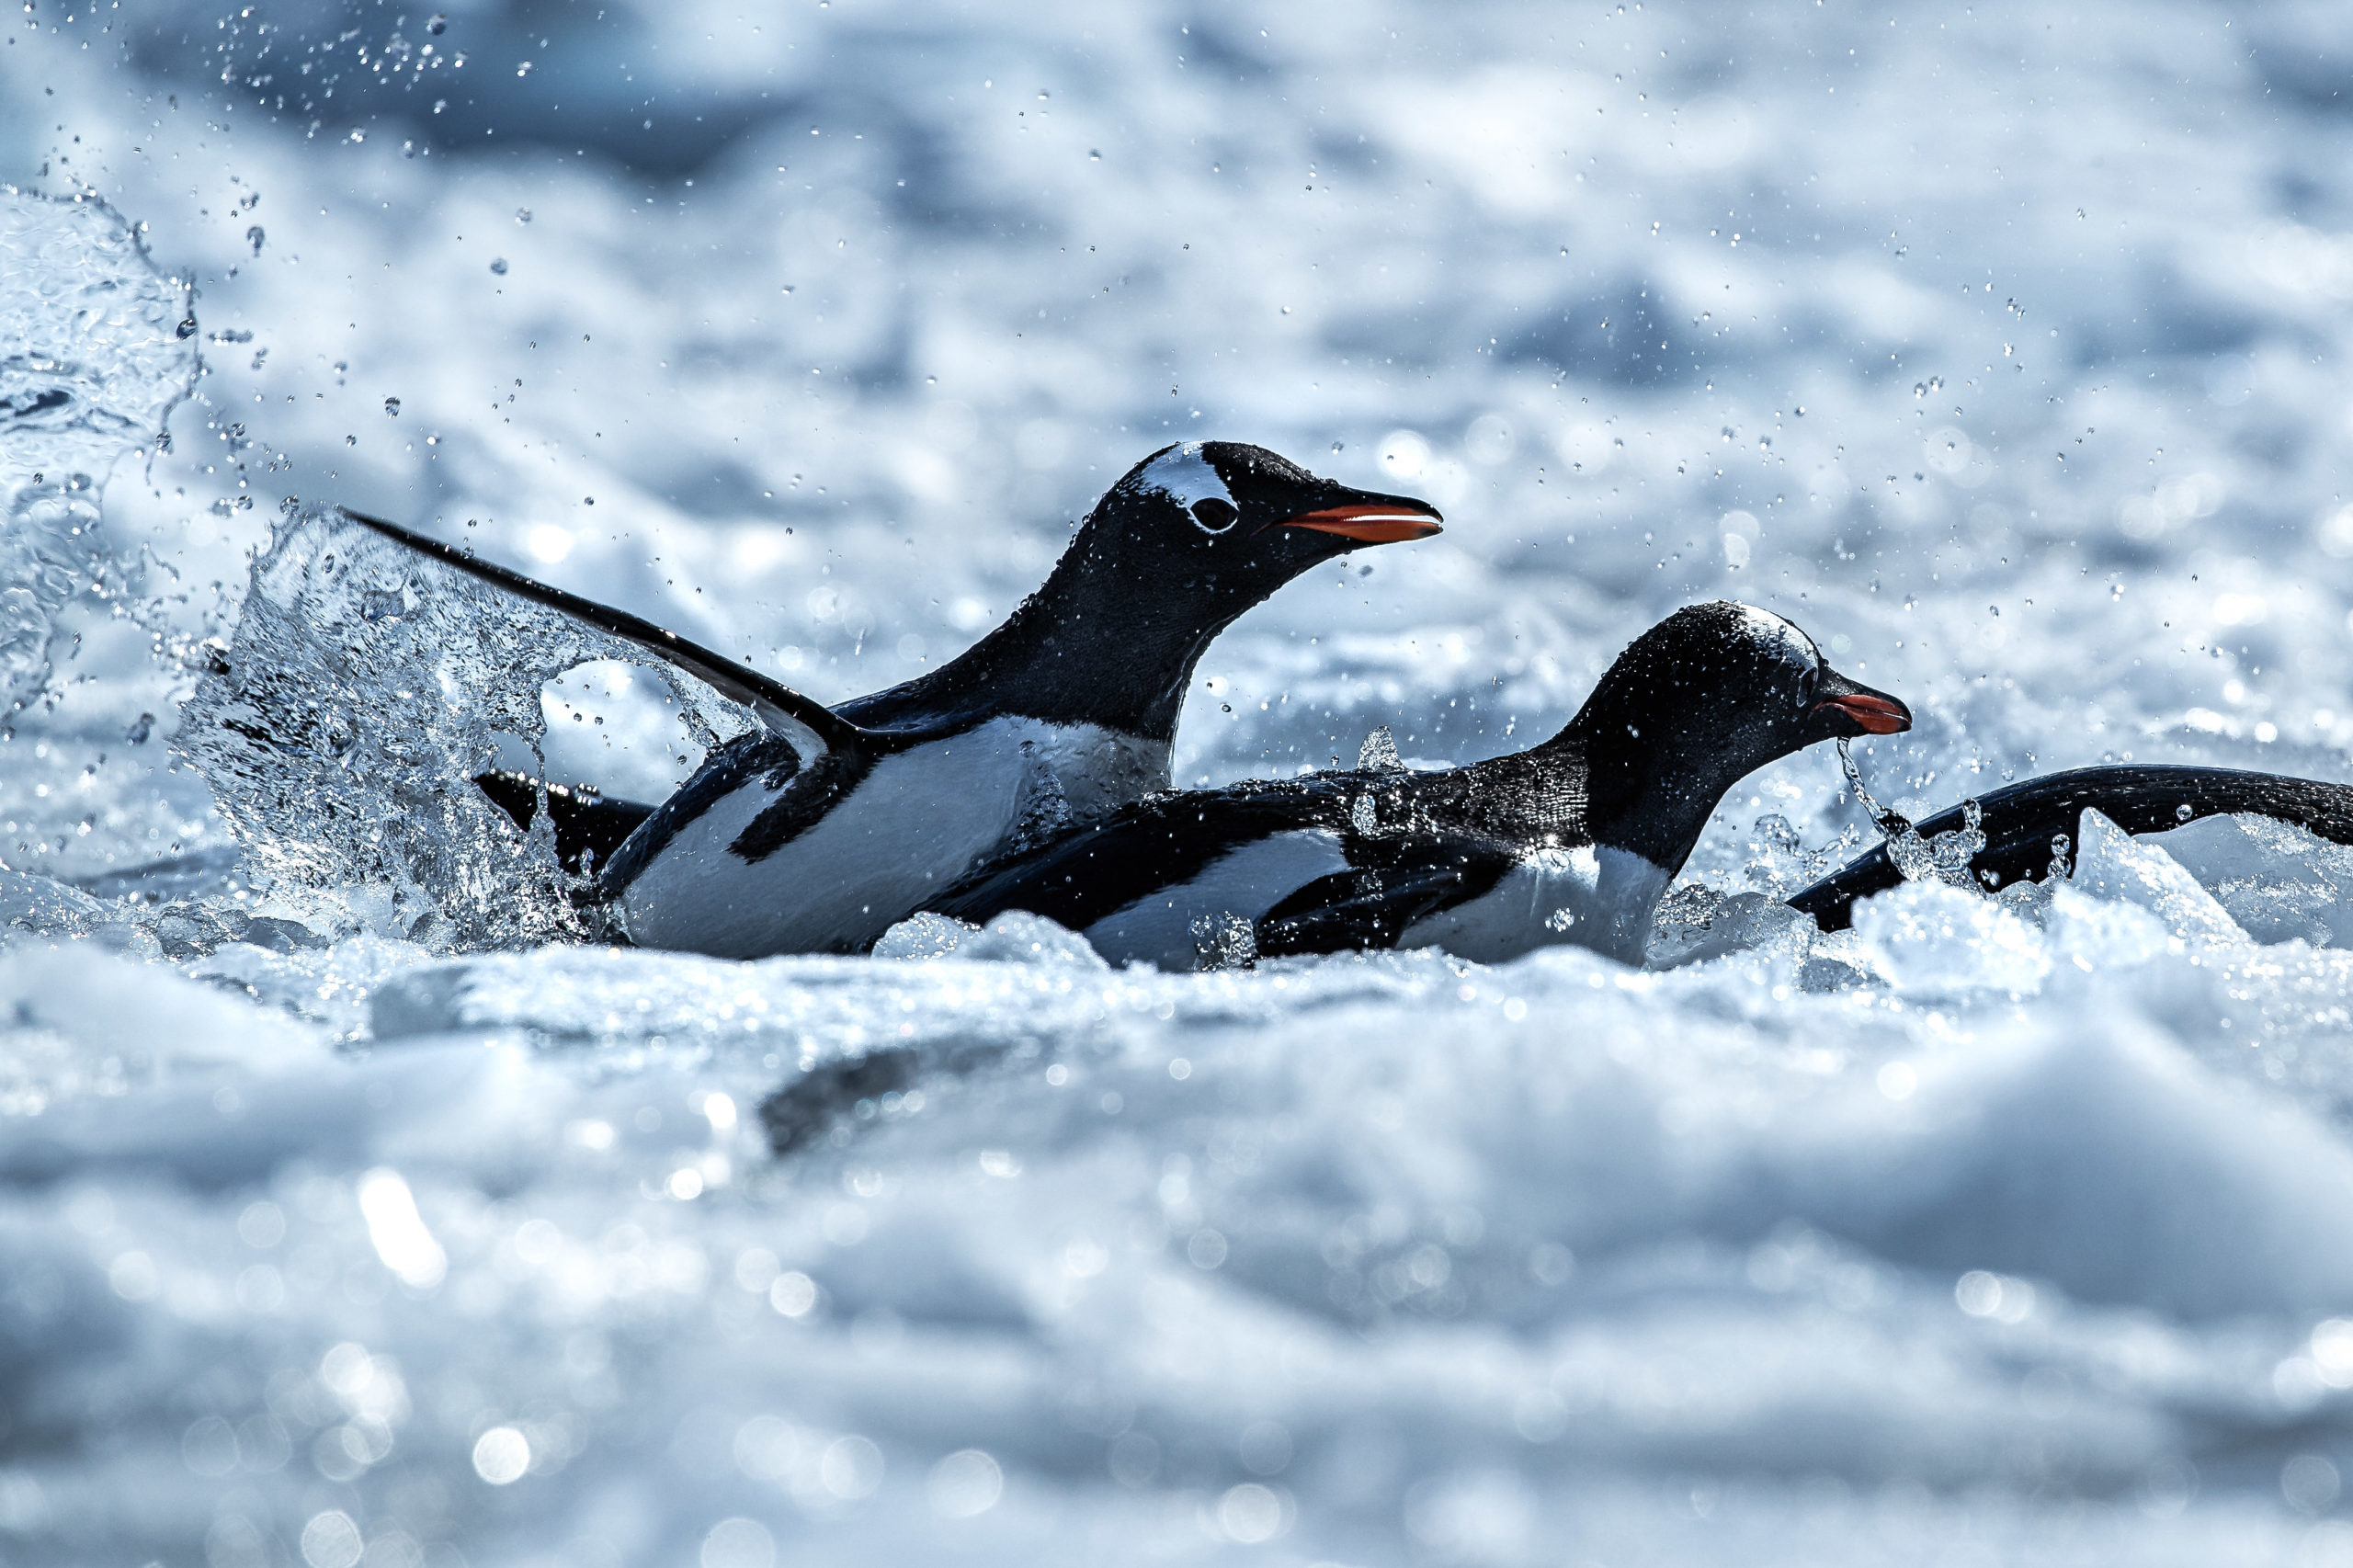 Wildlife photography of gentoo penguins swimming amongst the ice in Antarctica